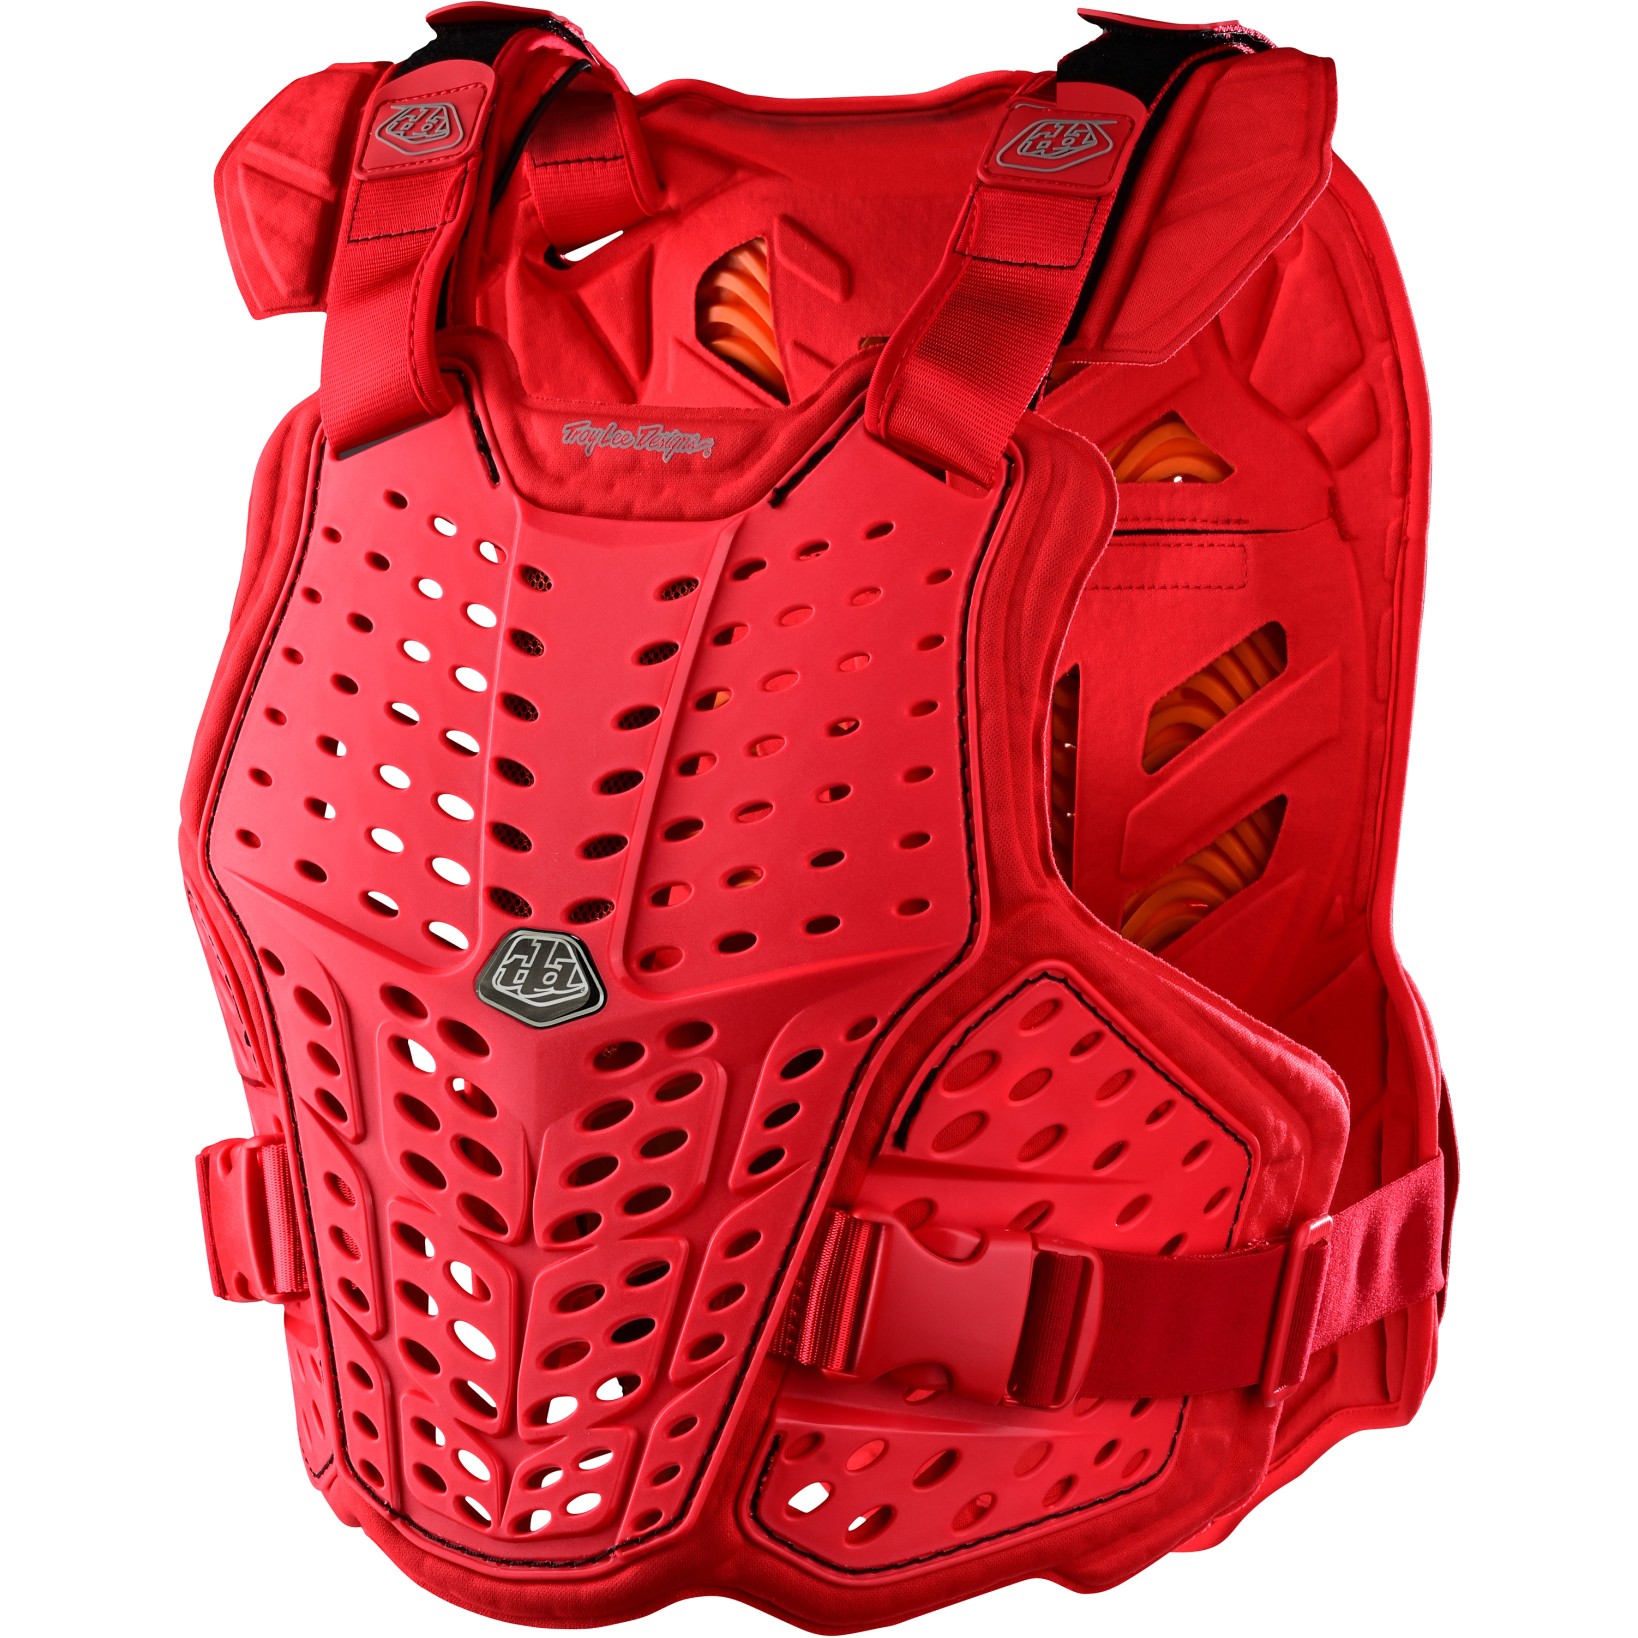 Productfoto van Troy Lee Designs Rockfight CE Chest Protector - red